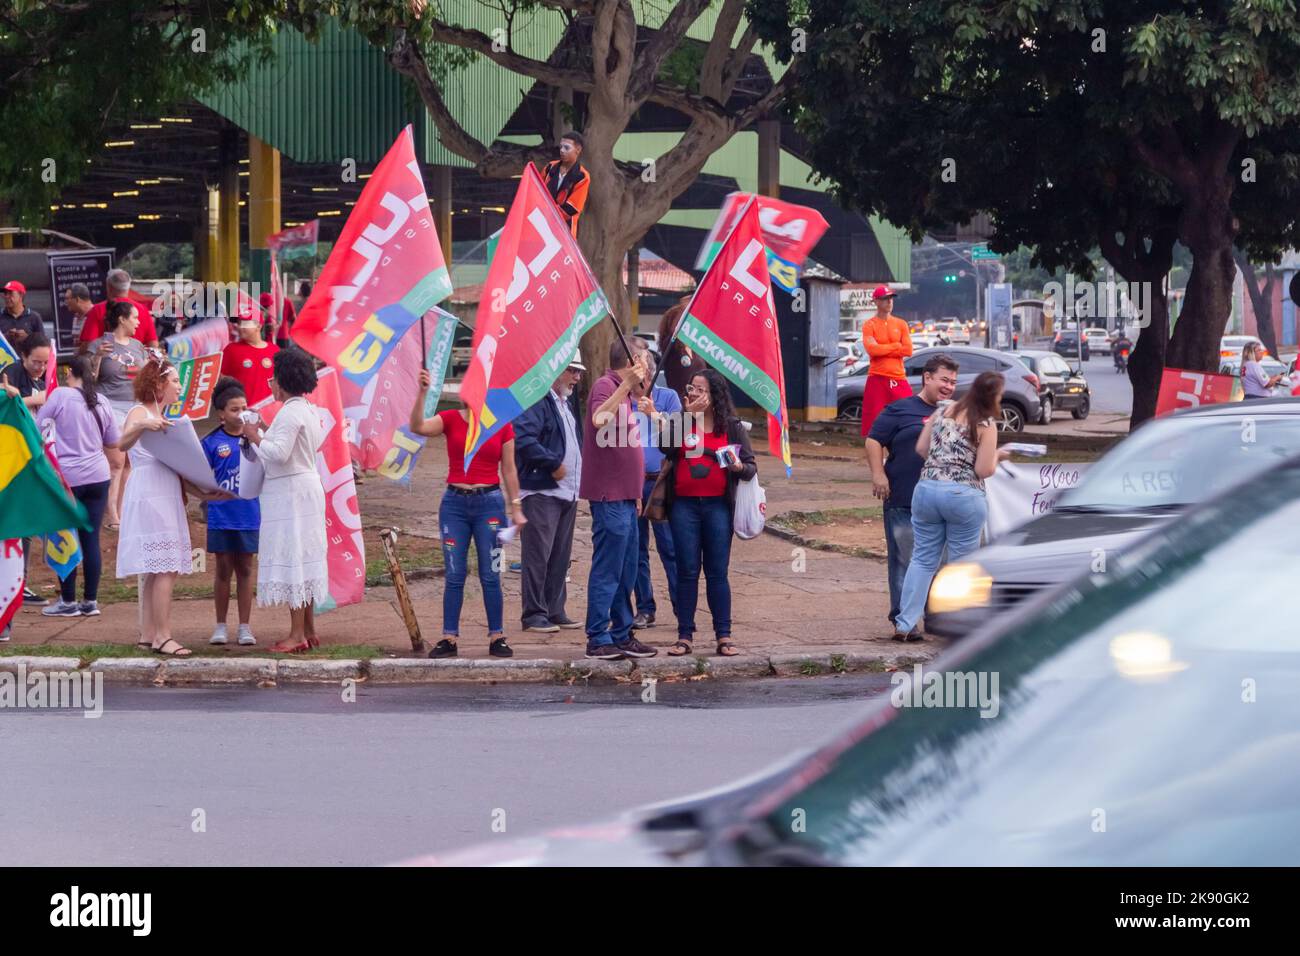 Goiânia, Goias, Brazil – October 21, 2022: Several people in action on the street with Lula's red flags. Image made in an act to ask for votes for Lul Stock Photo